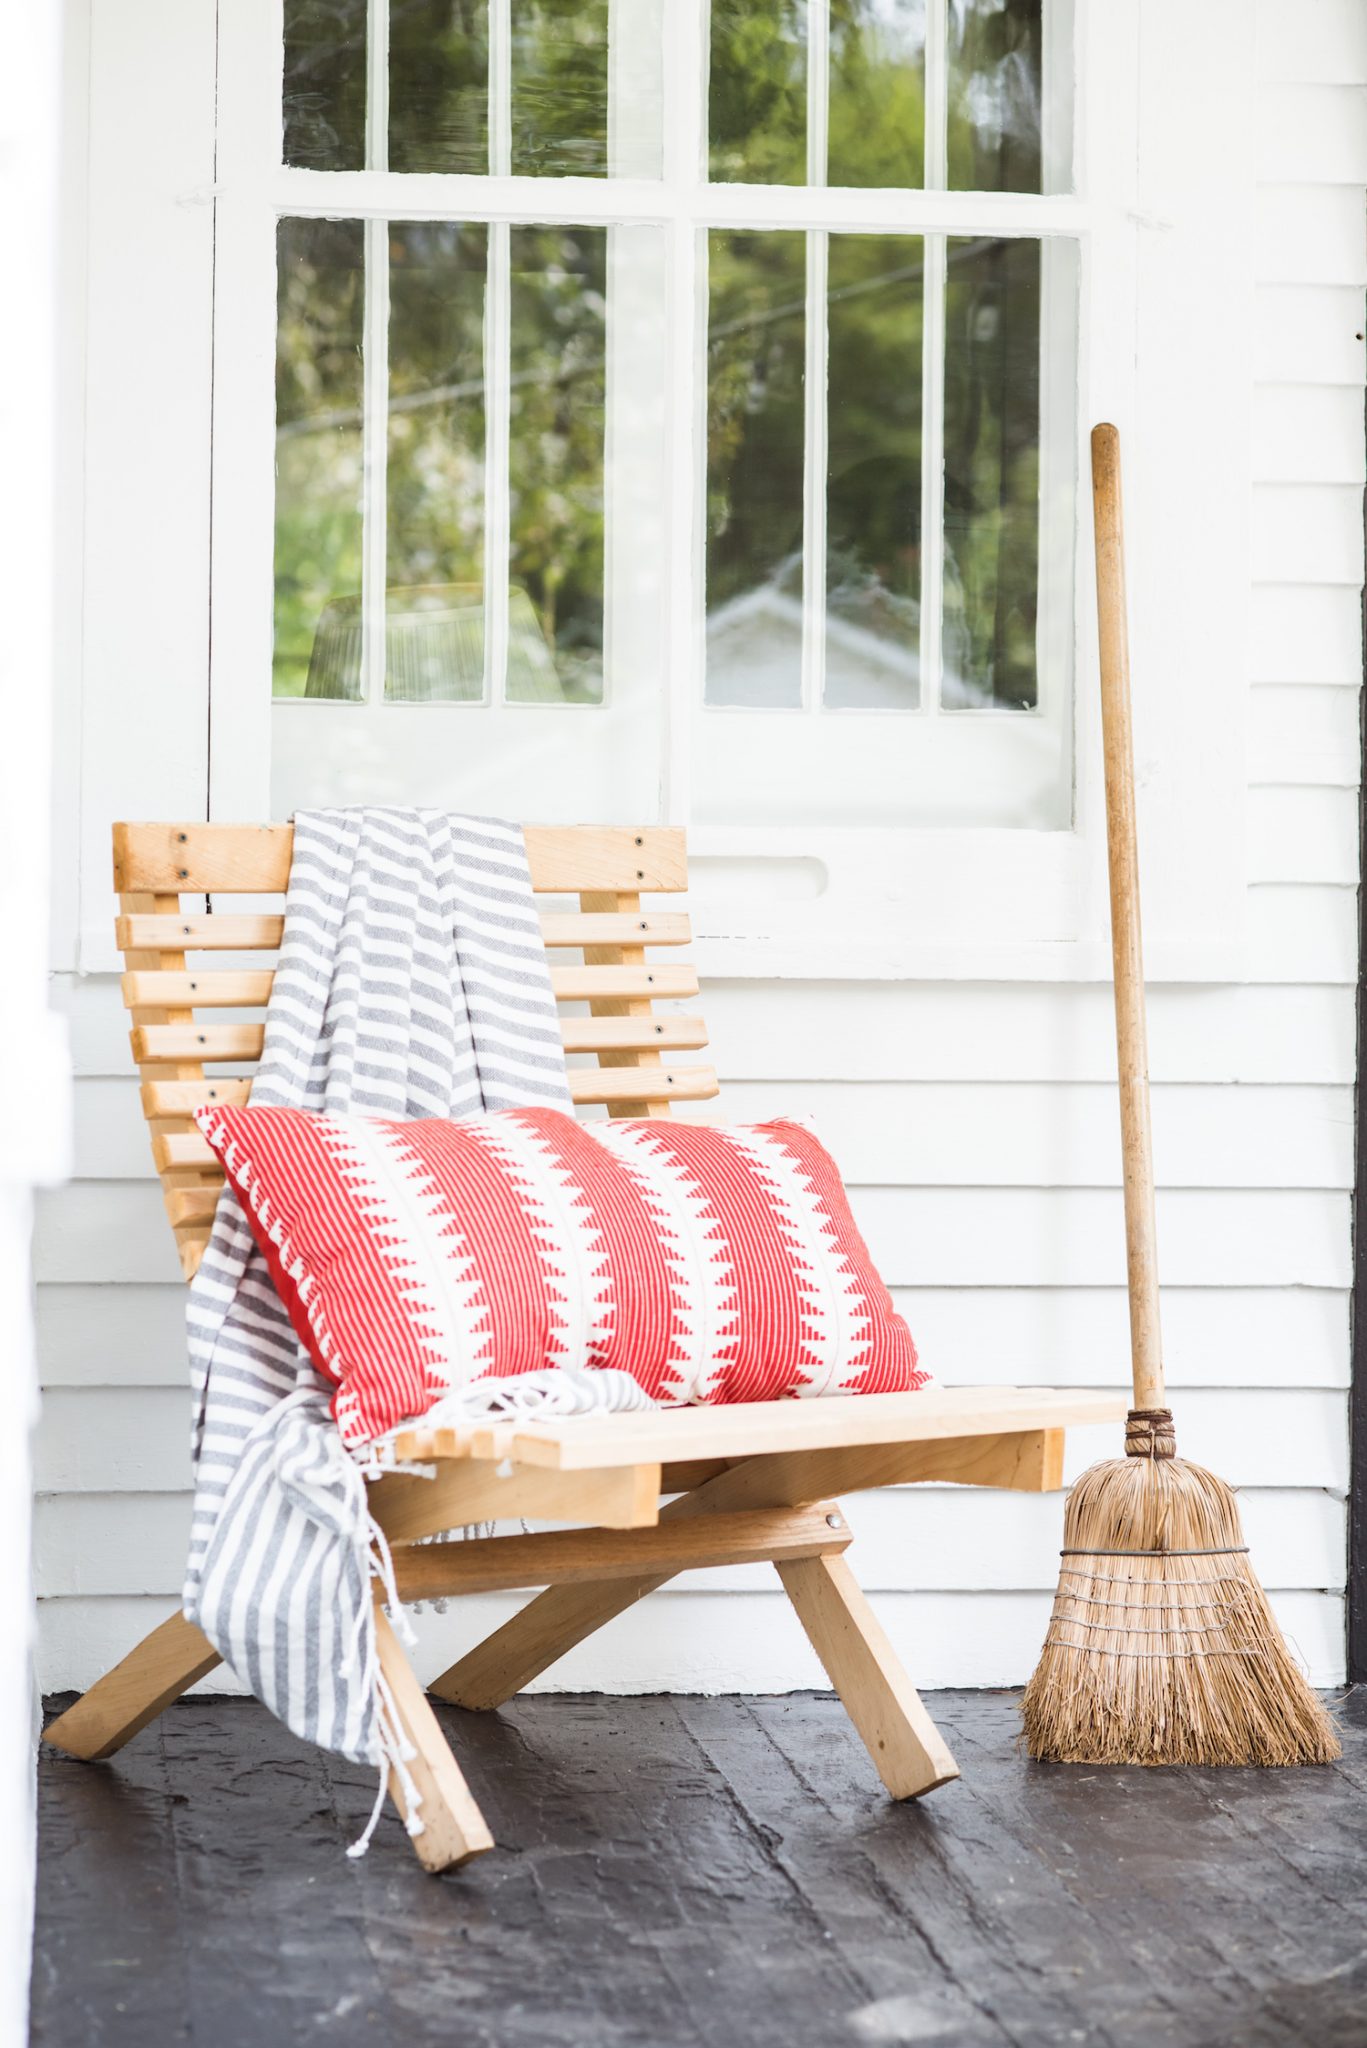 The Sweetest Occasion's Backyard Makeover | Home decor, home renovation ideas, patio ideas and more from @cydconverse